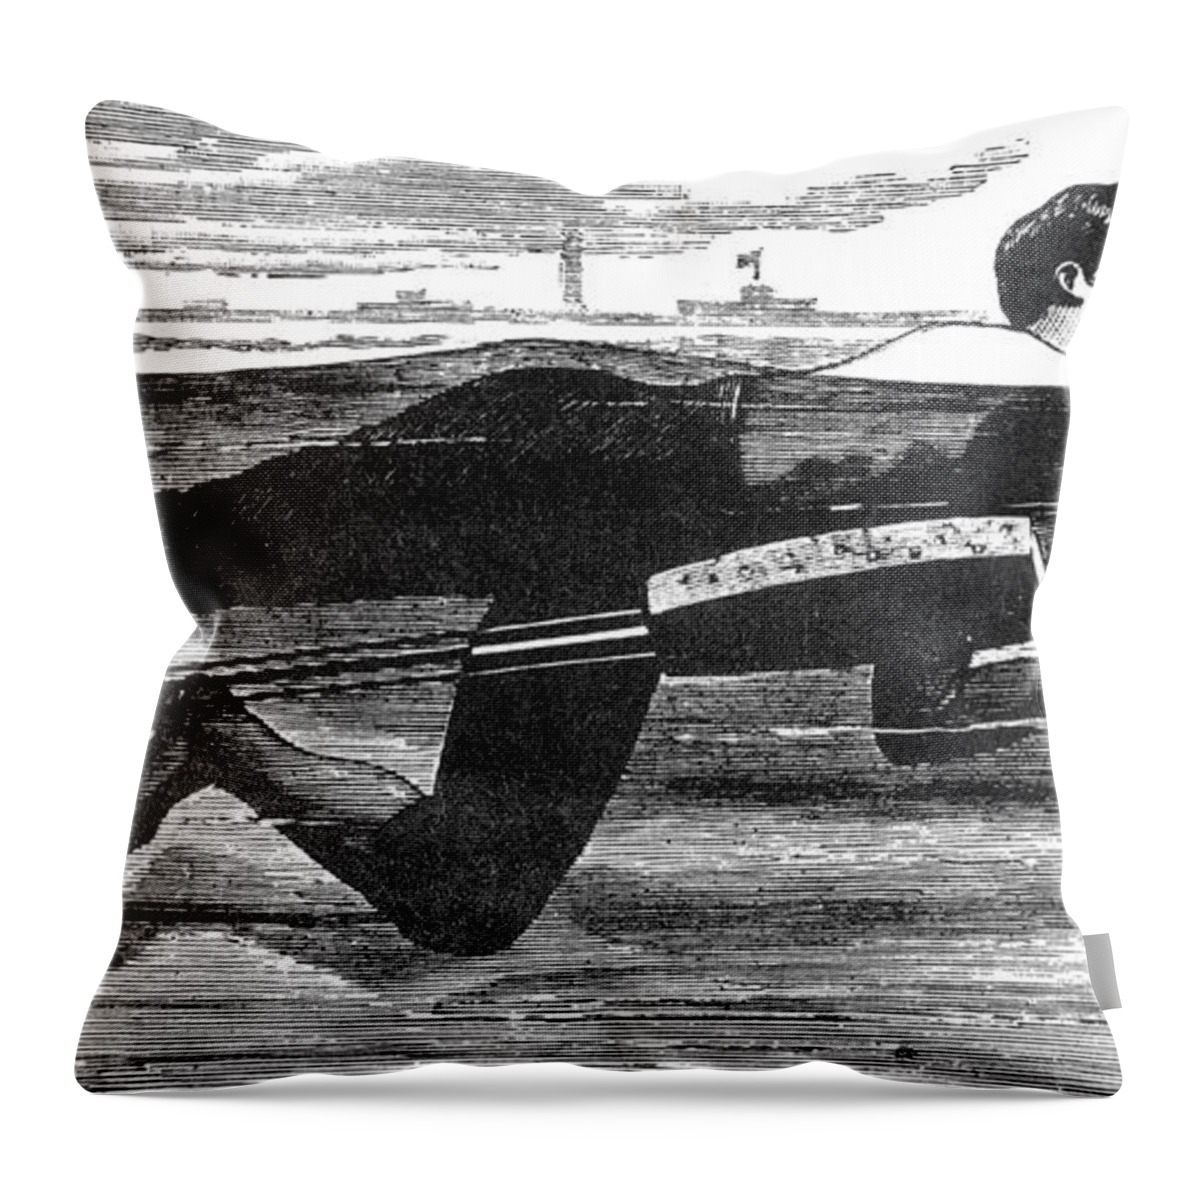 Science Throw Pillow featuring the photograph Richardsons Swimming Device 1880 by Science Source